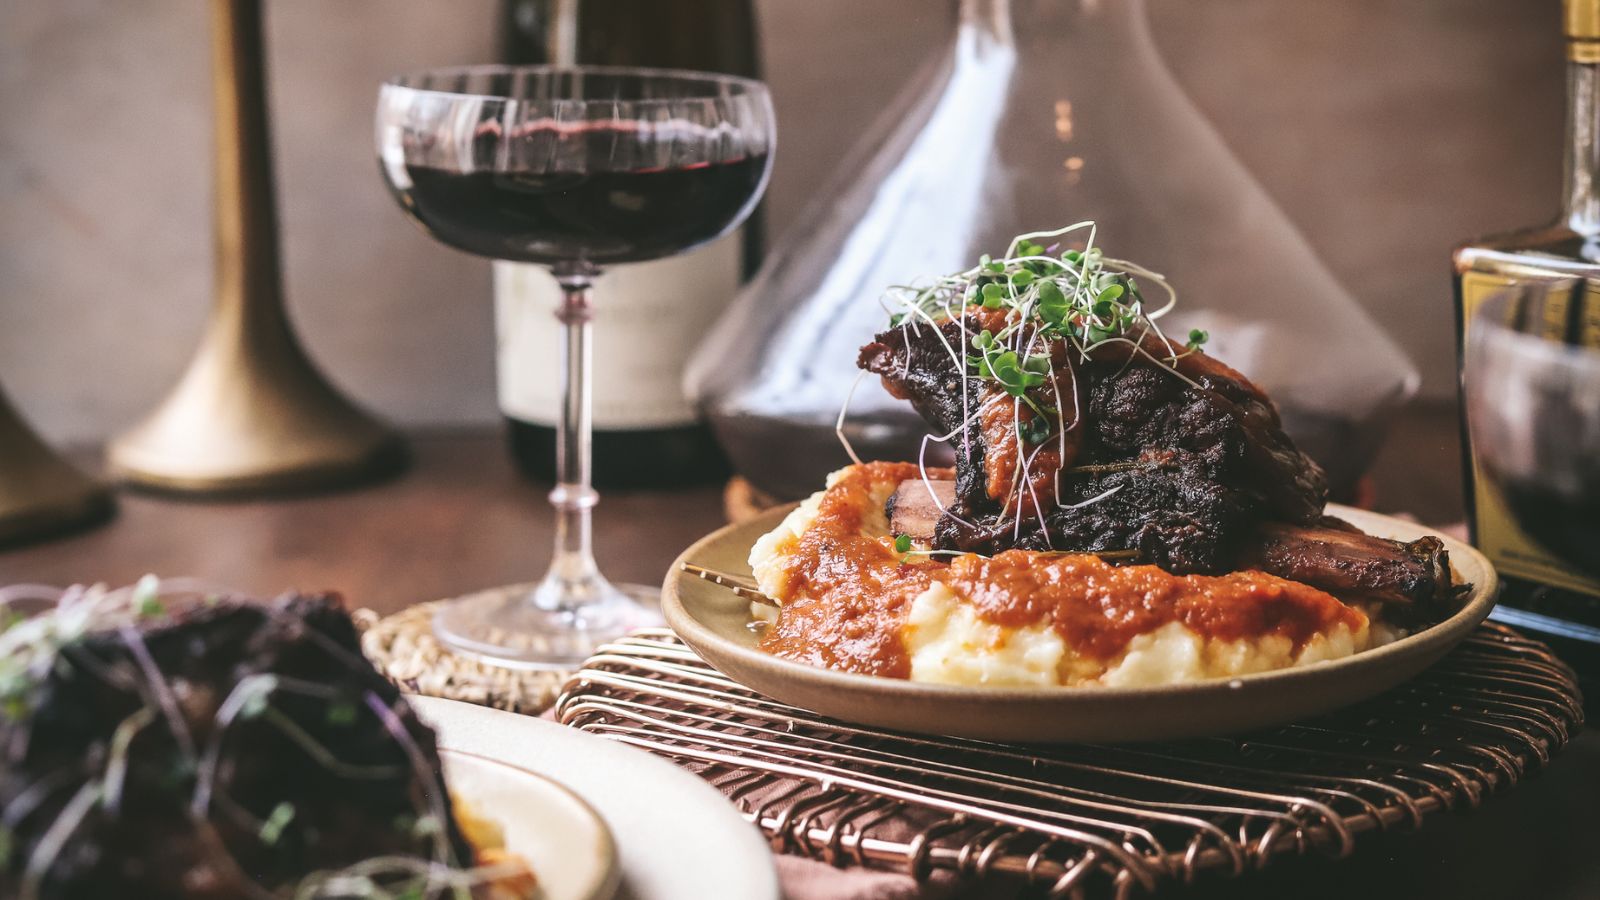 Braised beef short ribs with mashed potatoes and red wine. 